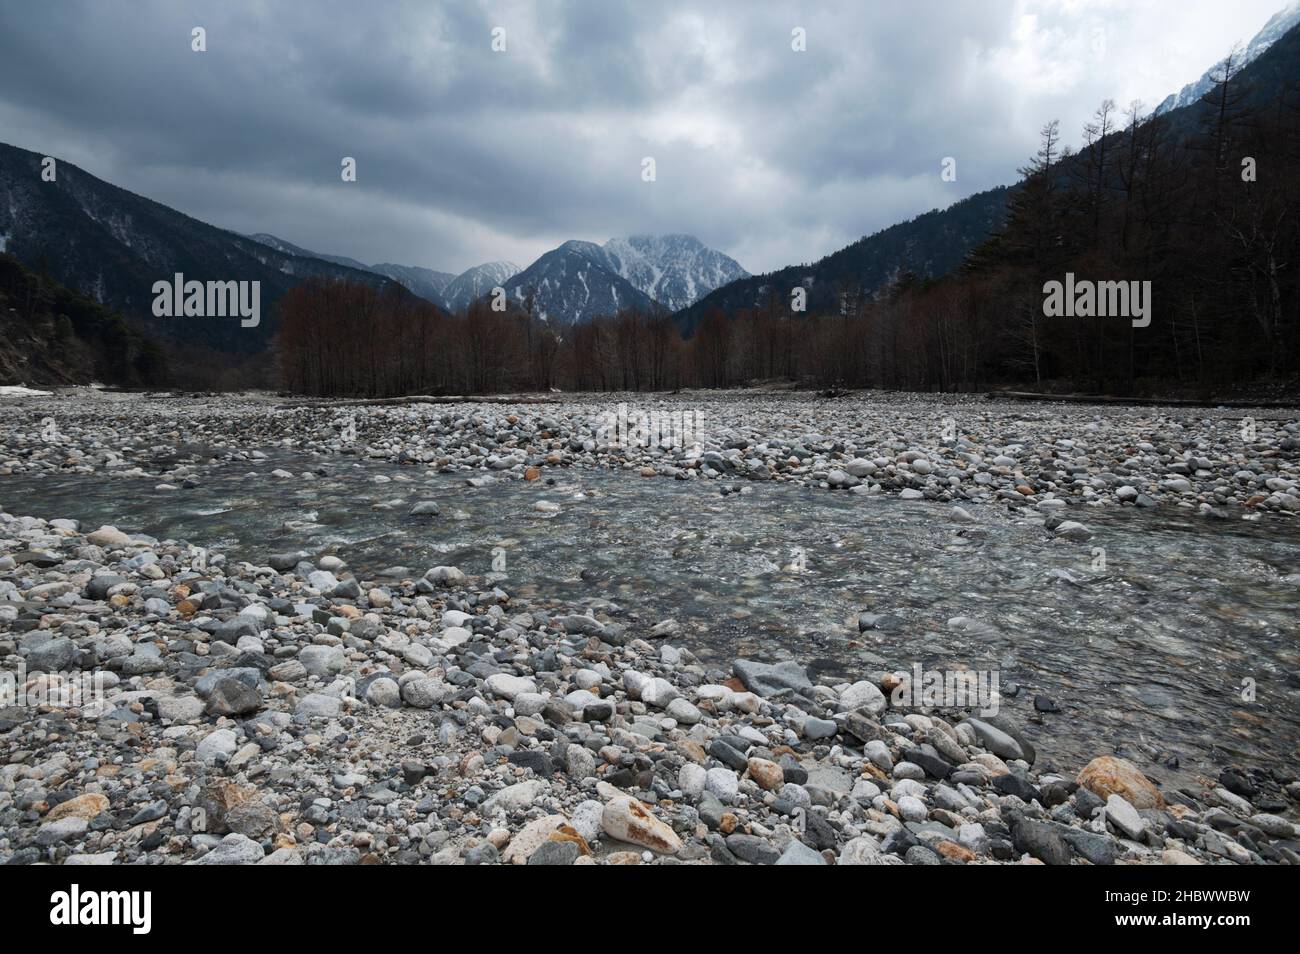 The Azusa River flowing across the Kamikochi plain in the heart of the Japan Alps, Kamikochi, in early Spring. Stock Photo